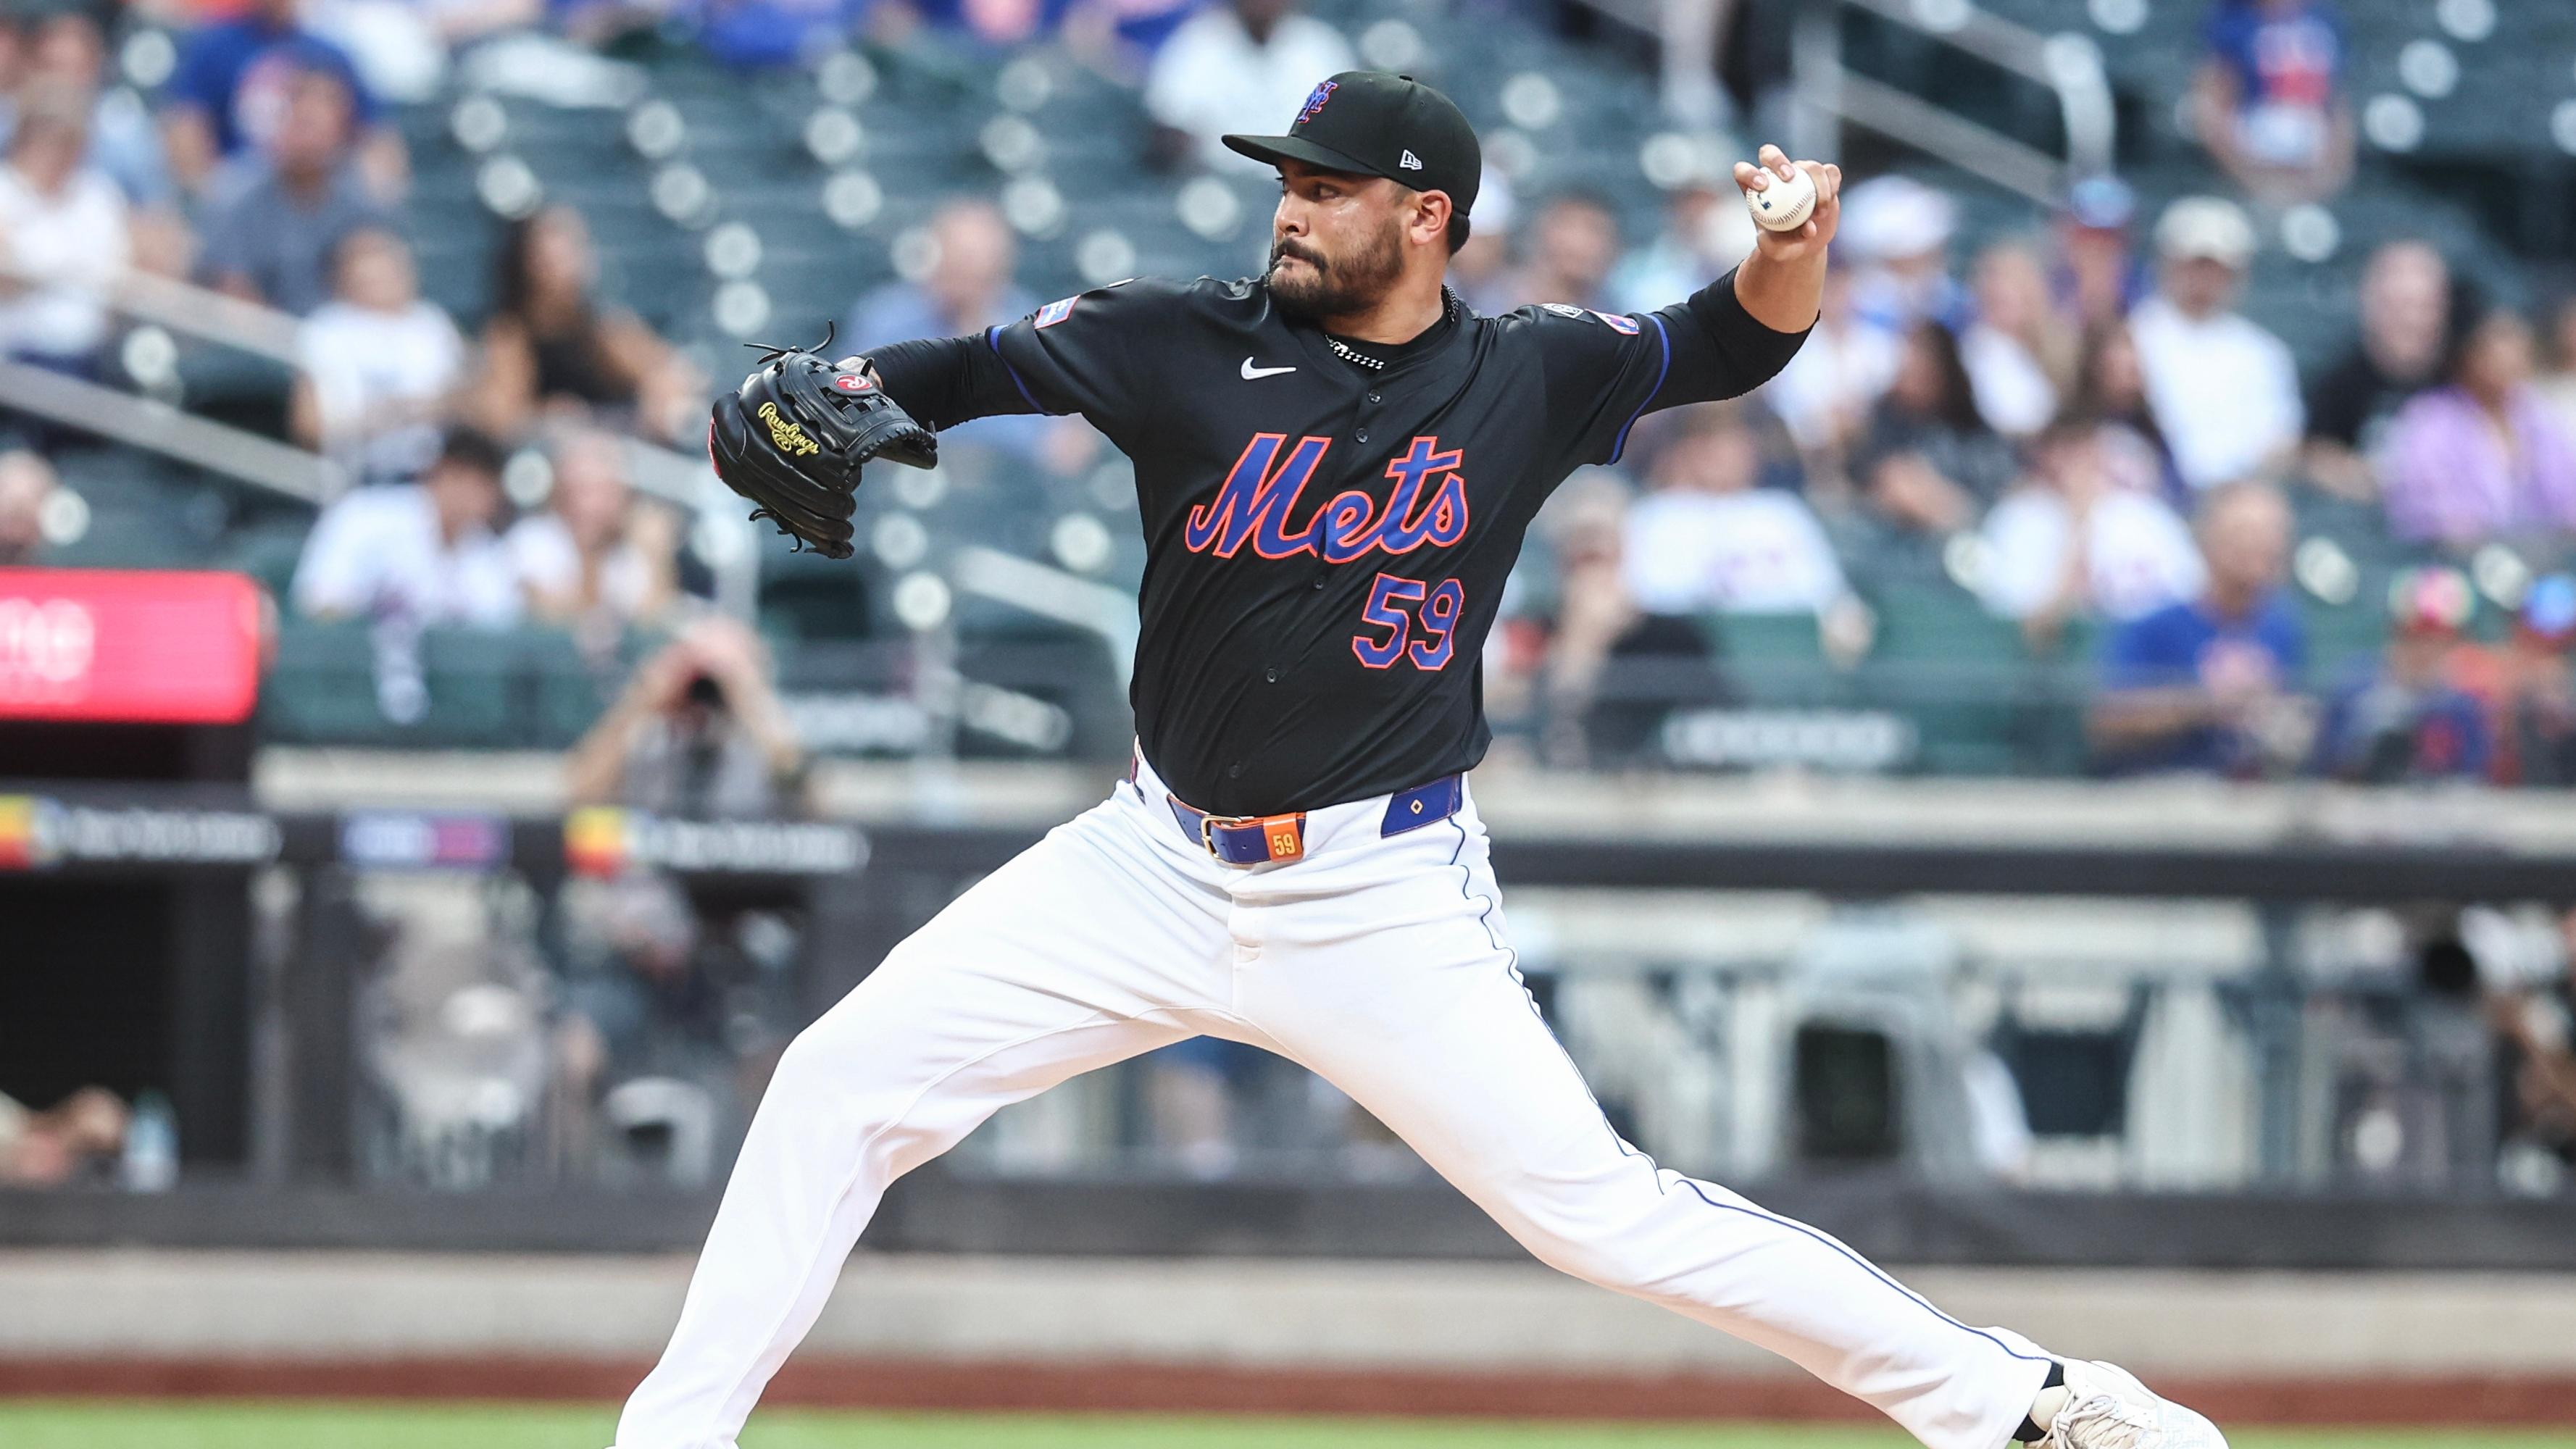 New York Mets starting pitcher Sean Manaea (59) pitches in the first inning against the Colorado Rockies at Citi Field.